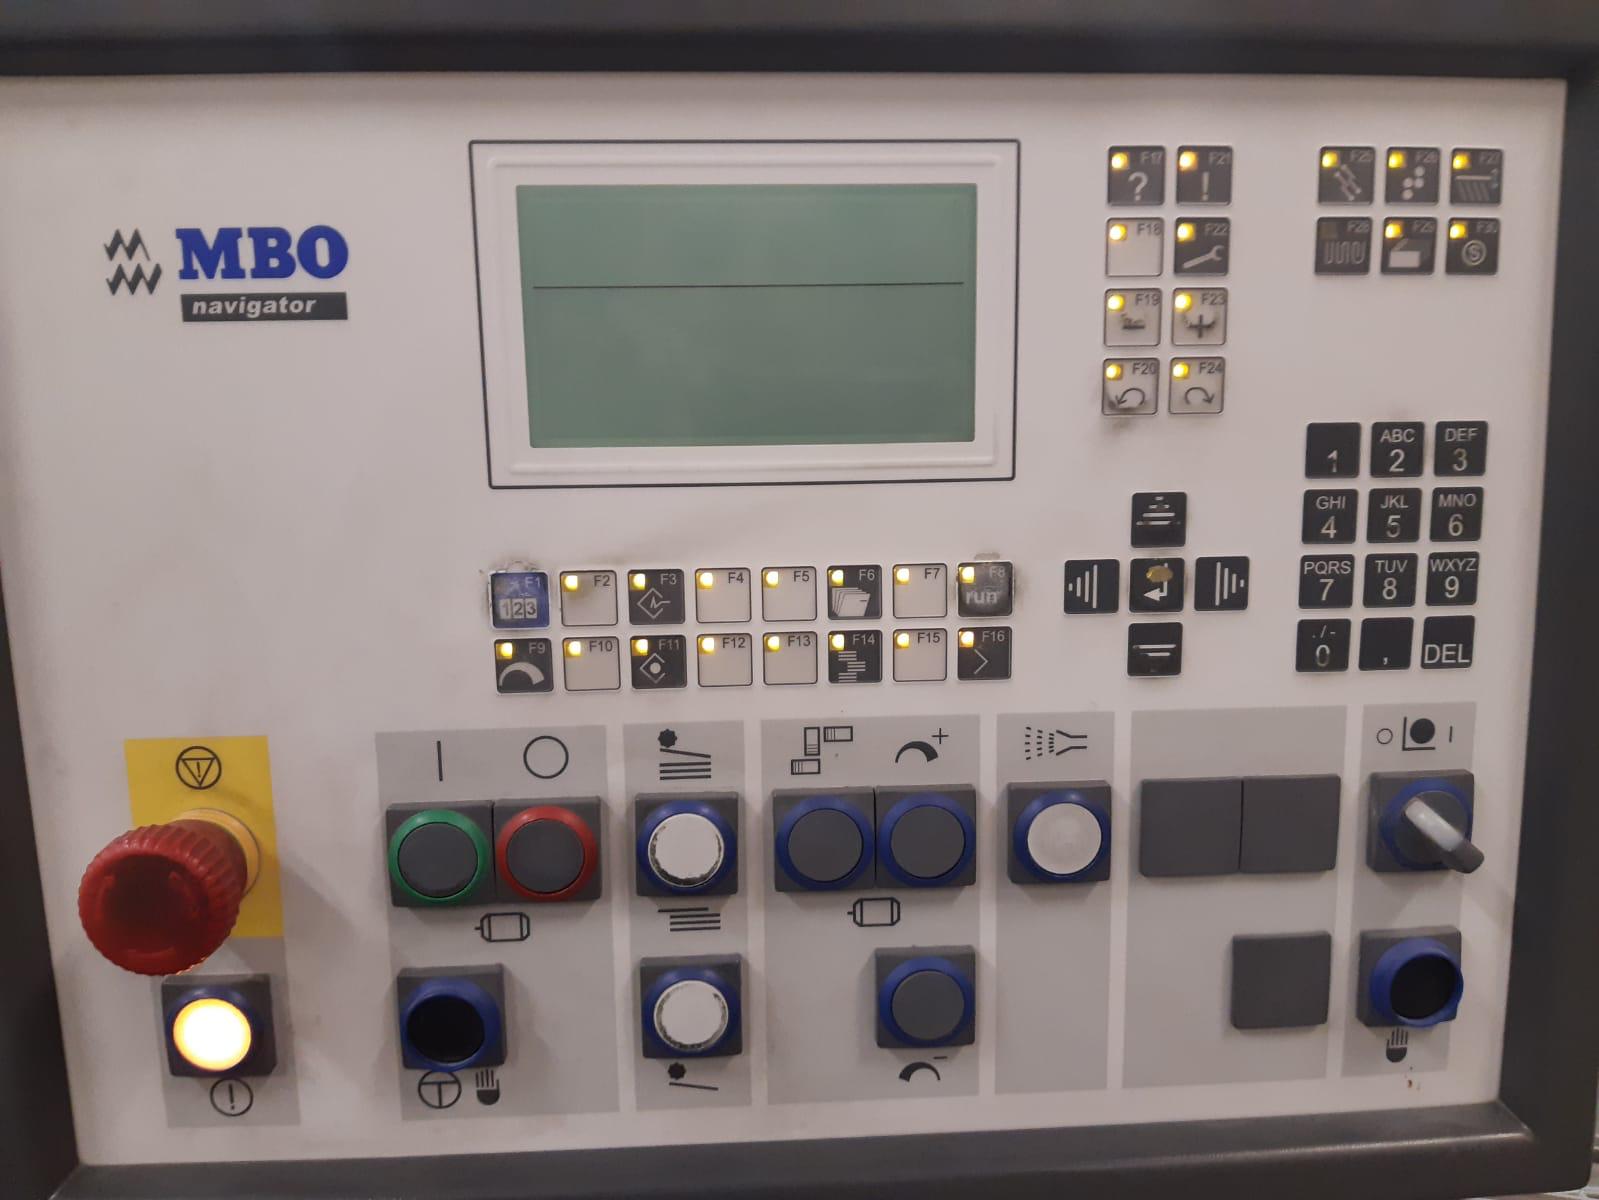 Mbo K800  2 RS-4 KTL + Z2 Year 2006 Size 